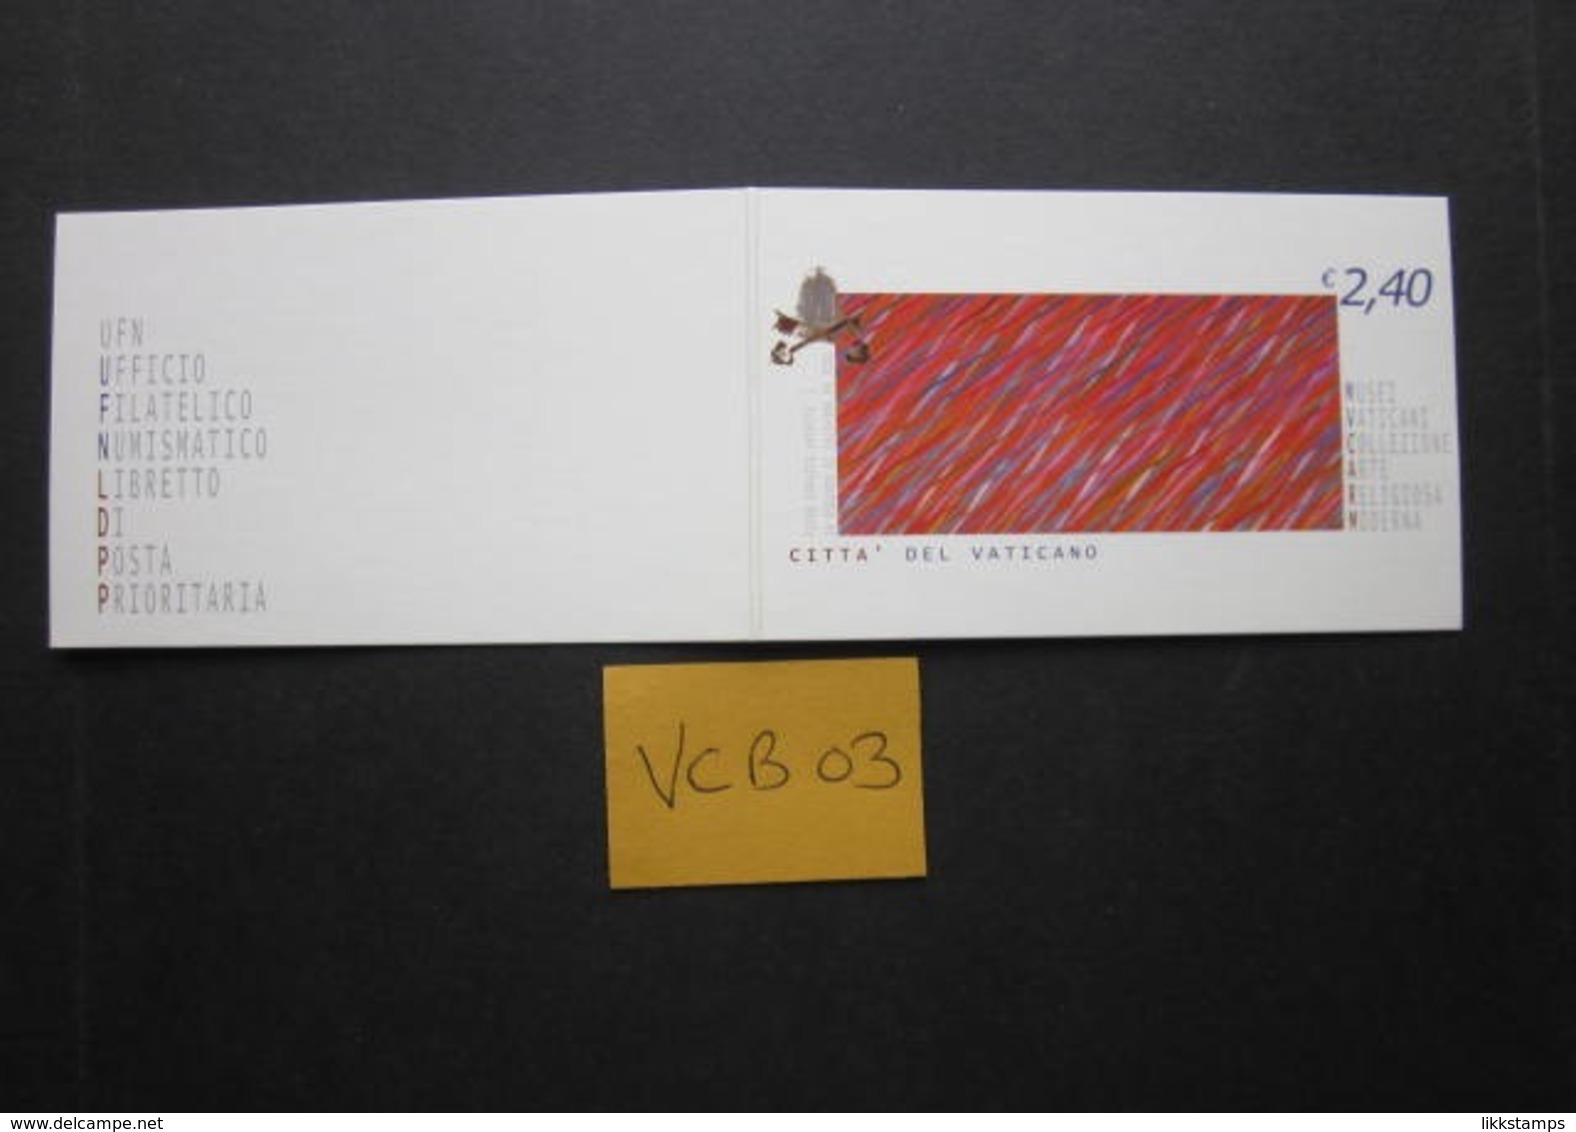 VATICAN CITY 2004 MODERN ART STAMP BOOKLET PRISTINE CONDITION WITH F.D.I. CANCEL #00867 - Booklets